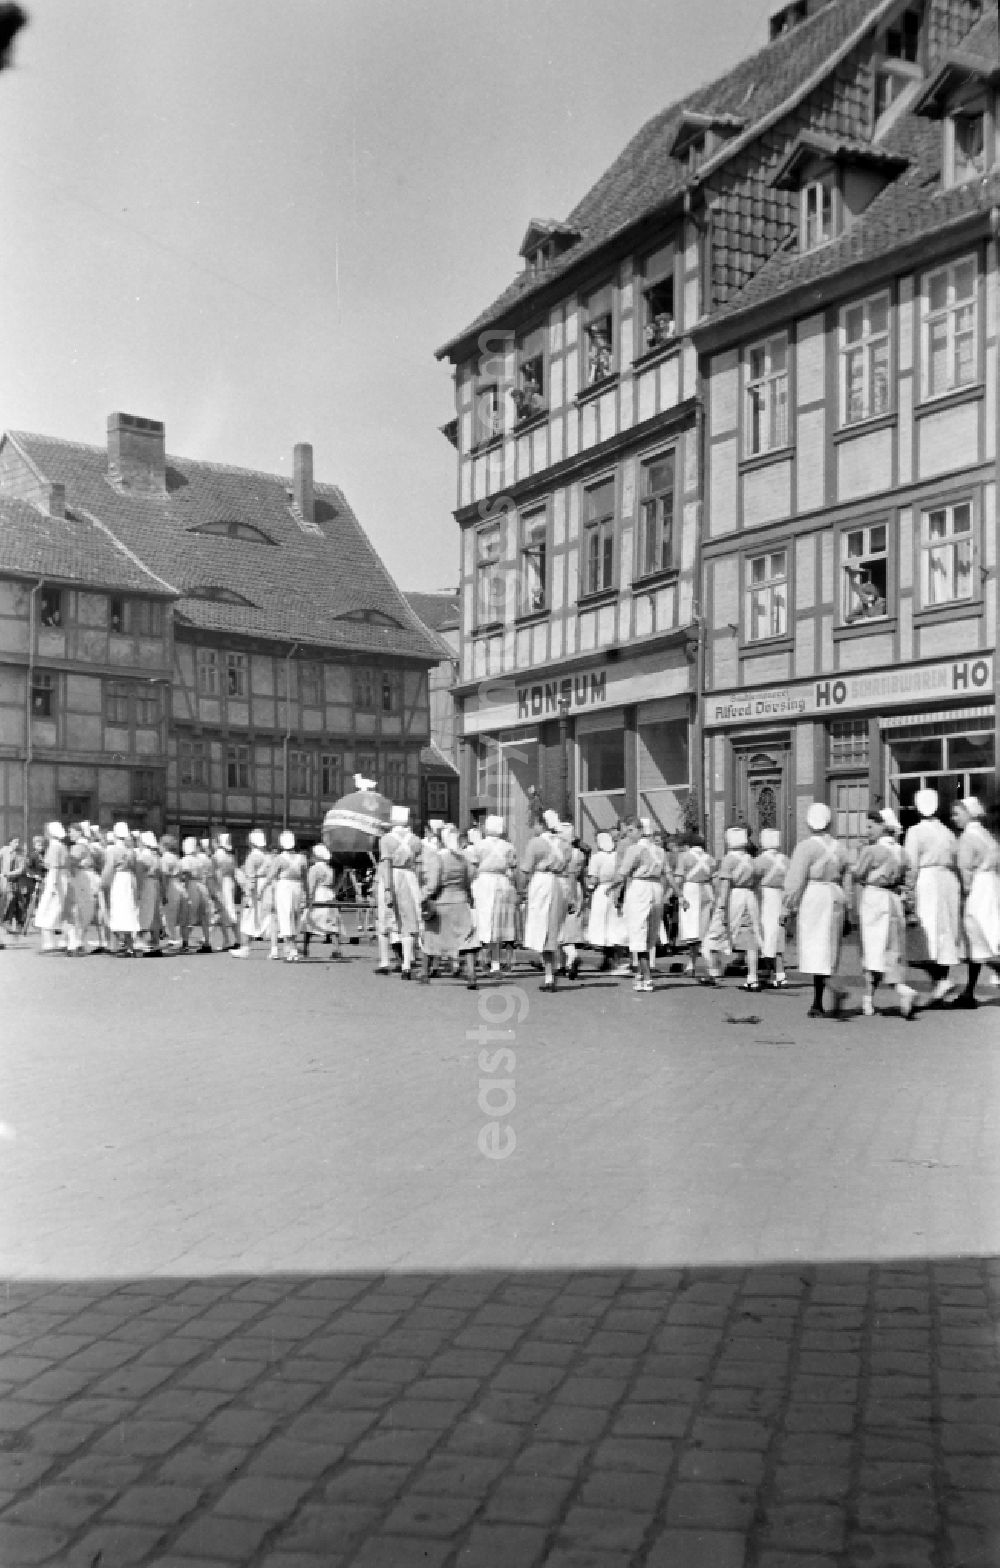 GDR image archive: Halberstadt - Nurses as march participants of the demonstration for the holiday of May 1st on the Johannesbrunnen on the streets of the city center in Halberstadt in the state of Saxony-Anhalt in the area of the former GDR, German Democratic Republic